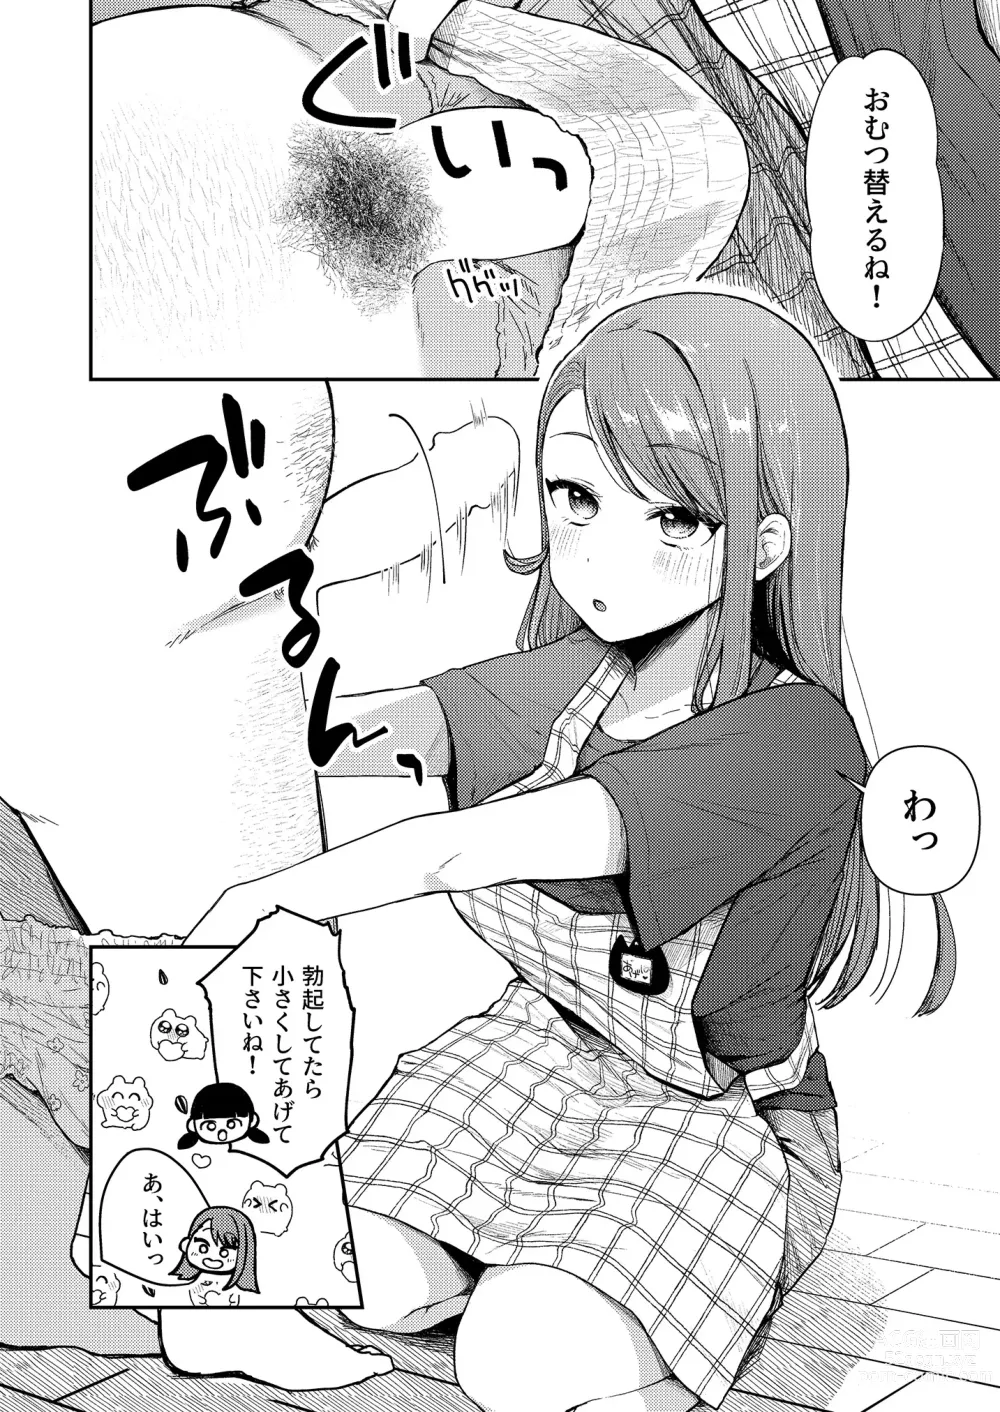 Page 6 of doujinshi Ageha tente to issho